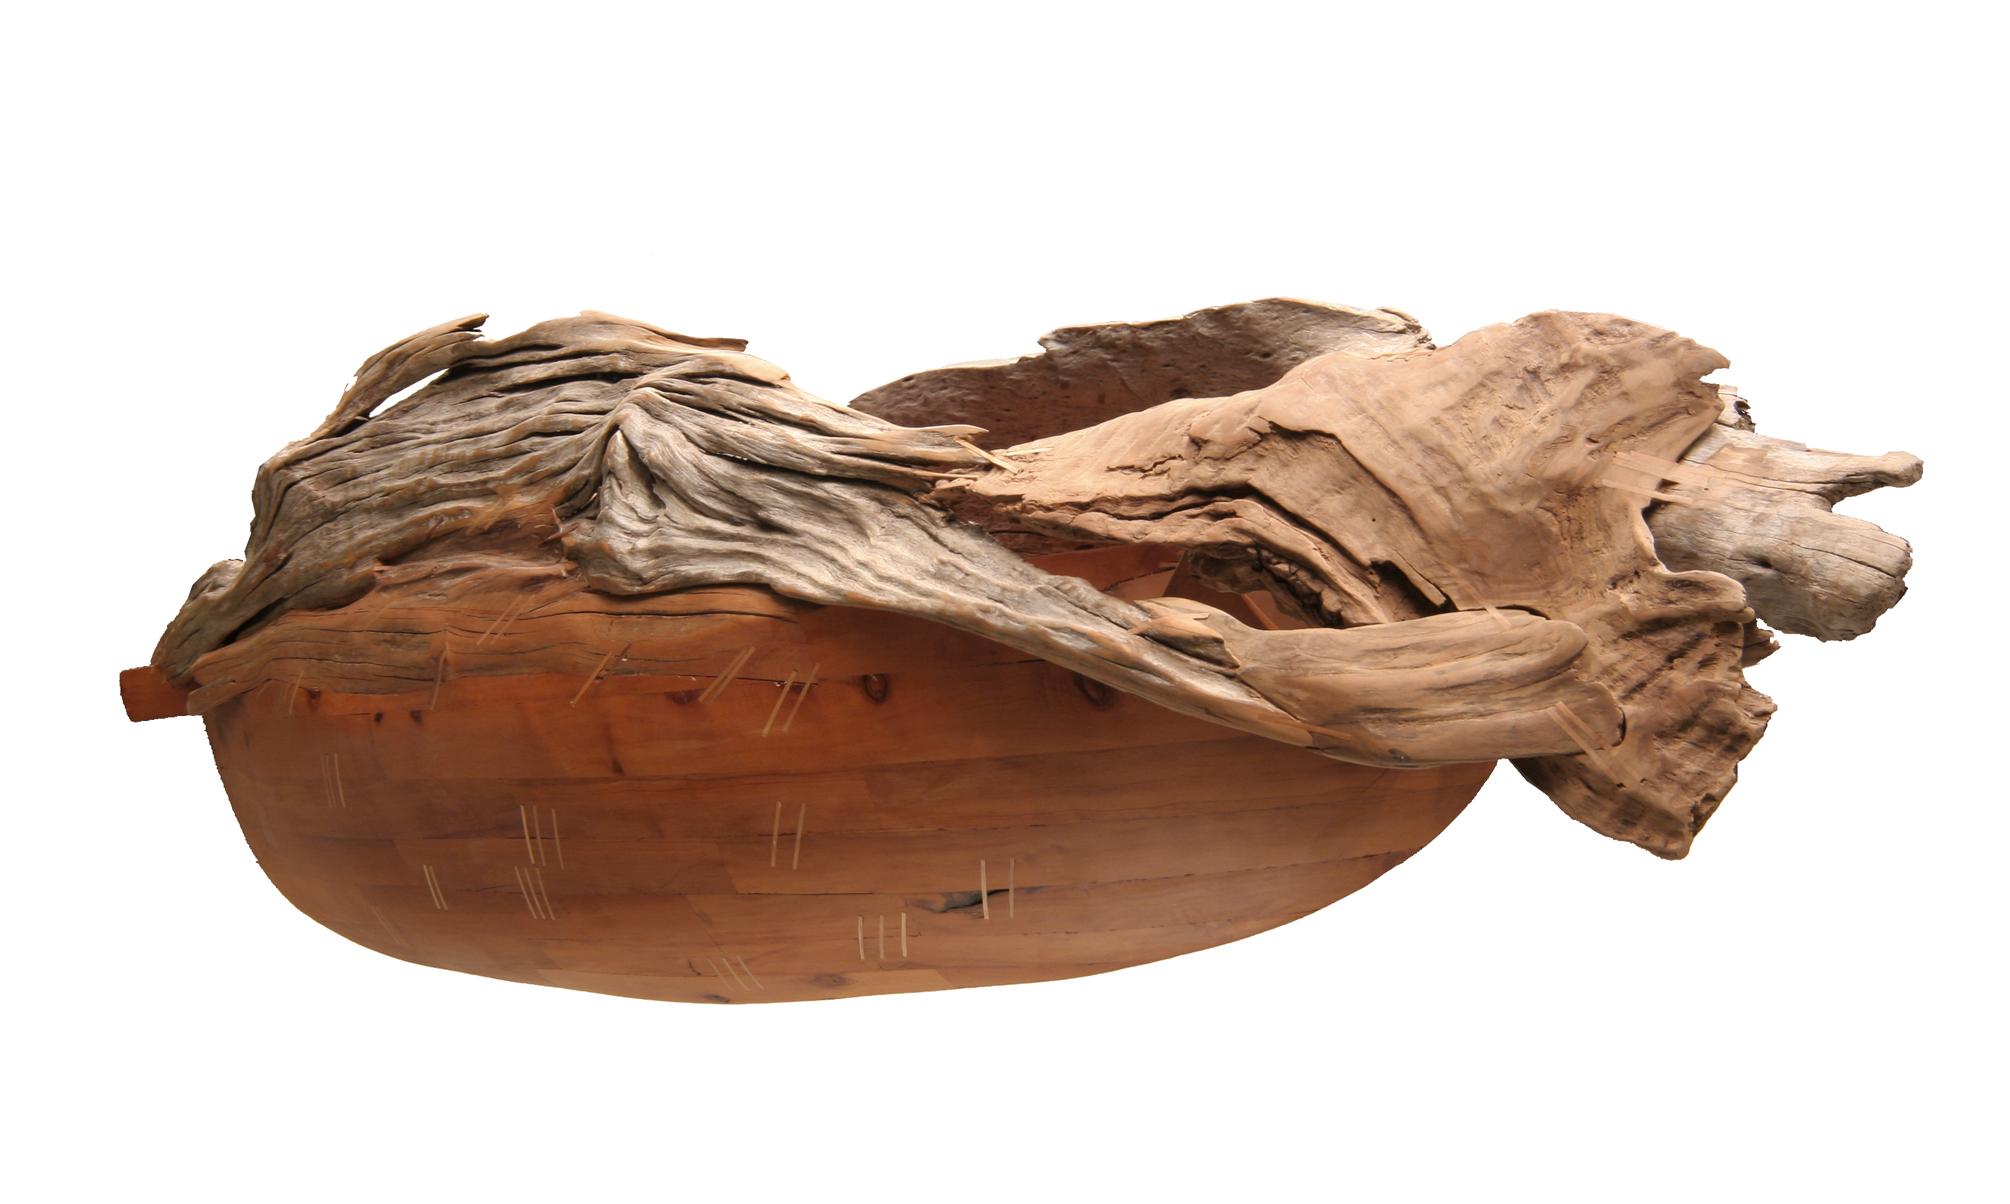 Barca Pez (Fish Boat) - wood sculpture by Chilean artist Pilar Ovalle For Sale 1